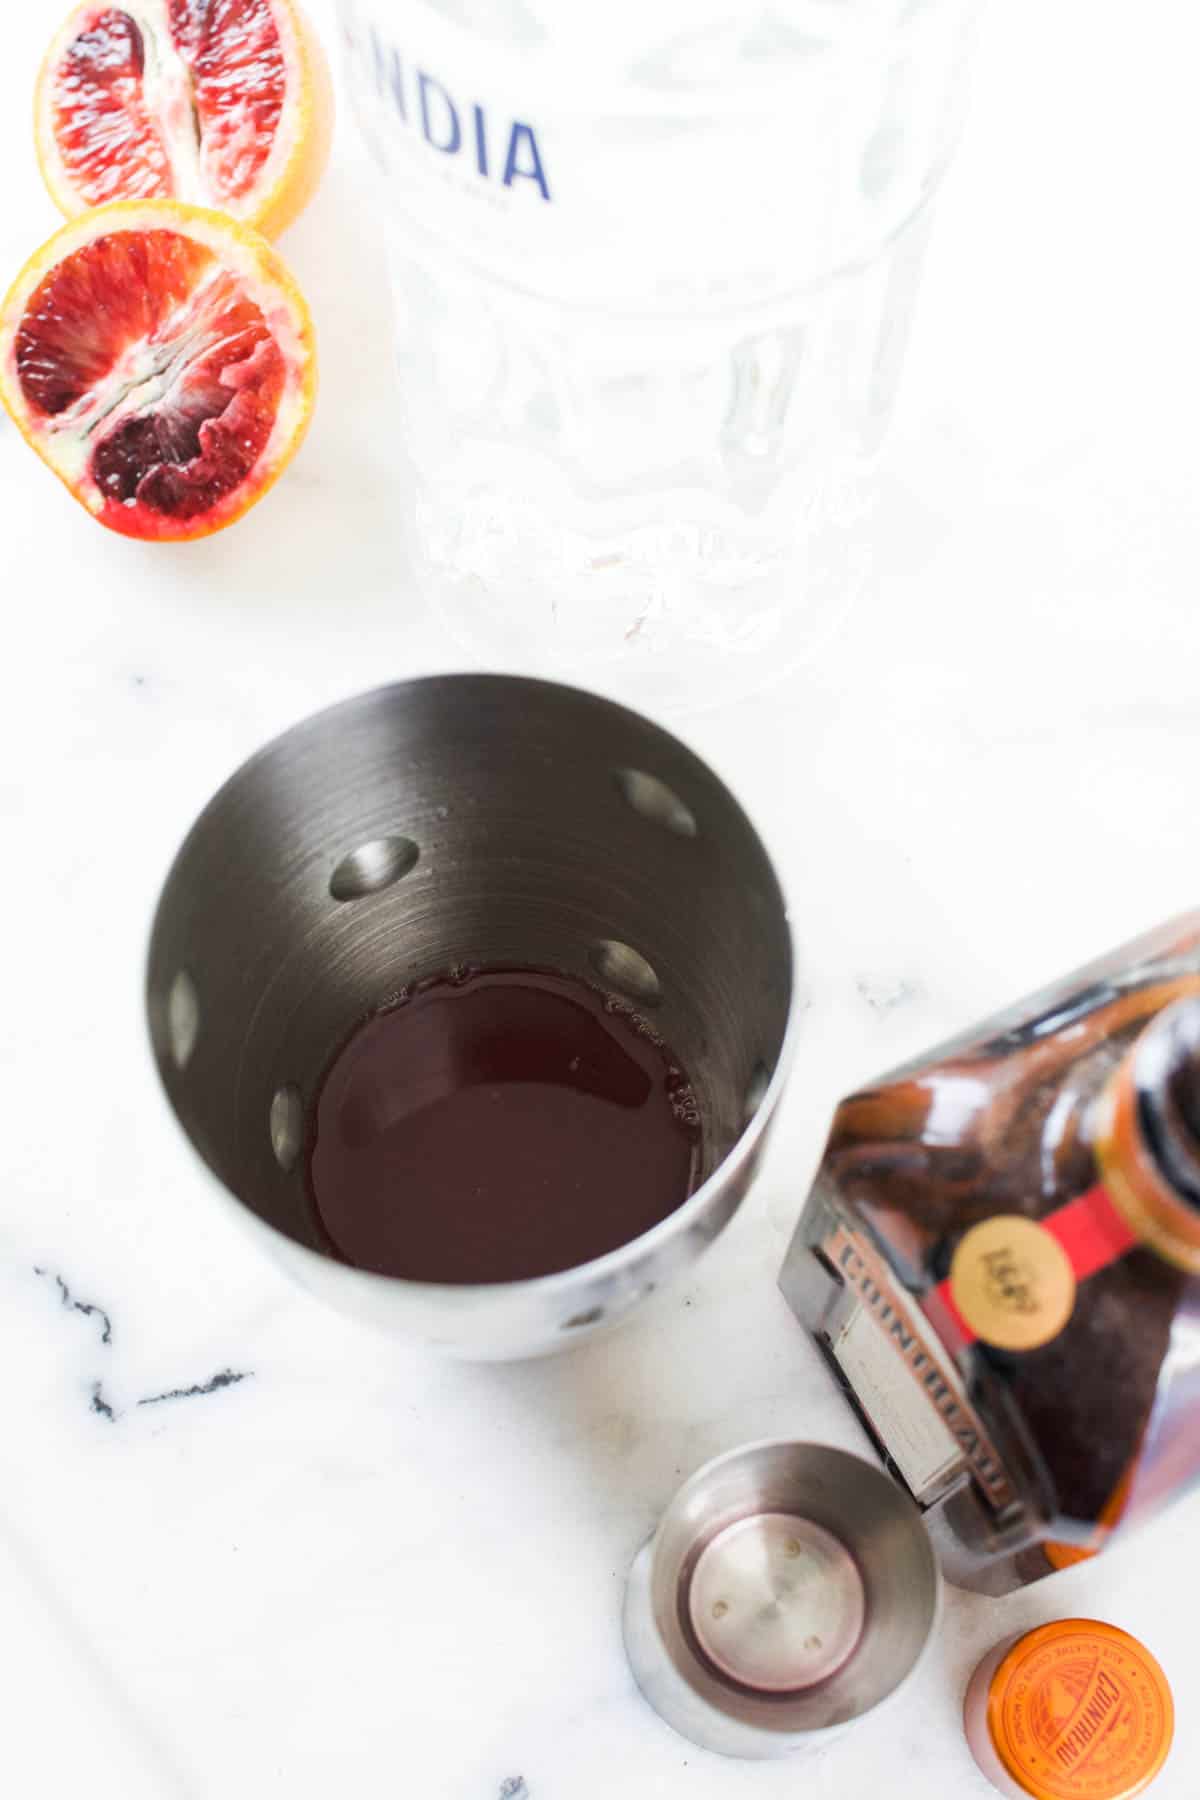 A cocktail shaker on a counter next to a bottle of Cointreau and cut blood oranges.